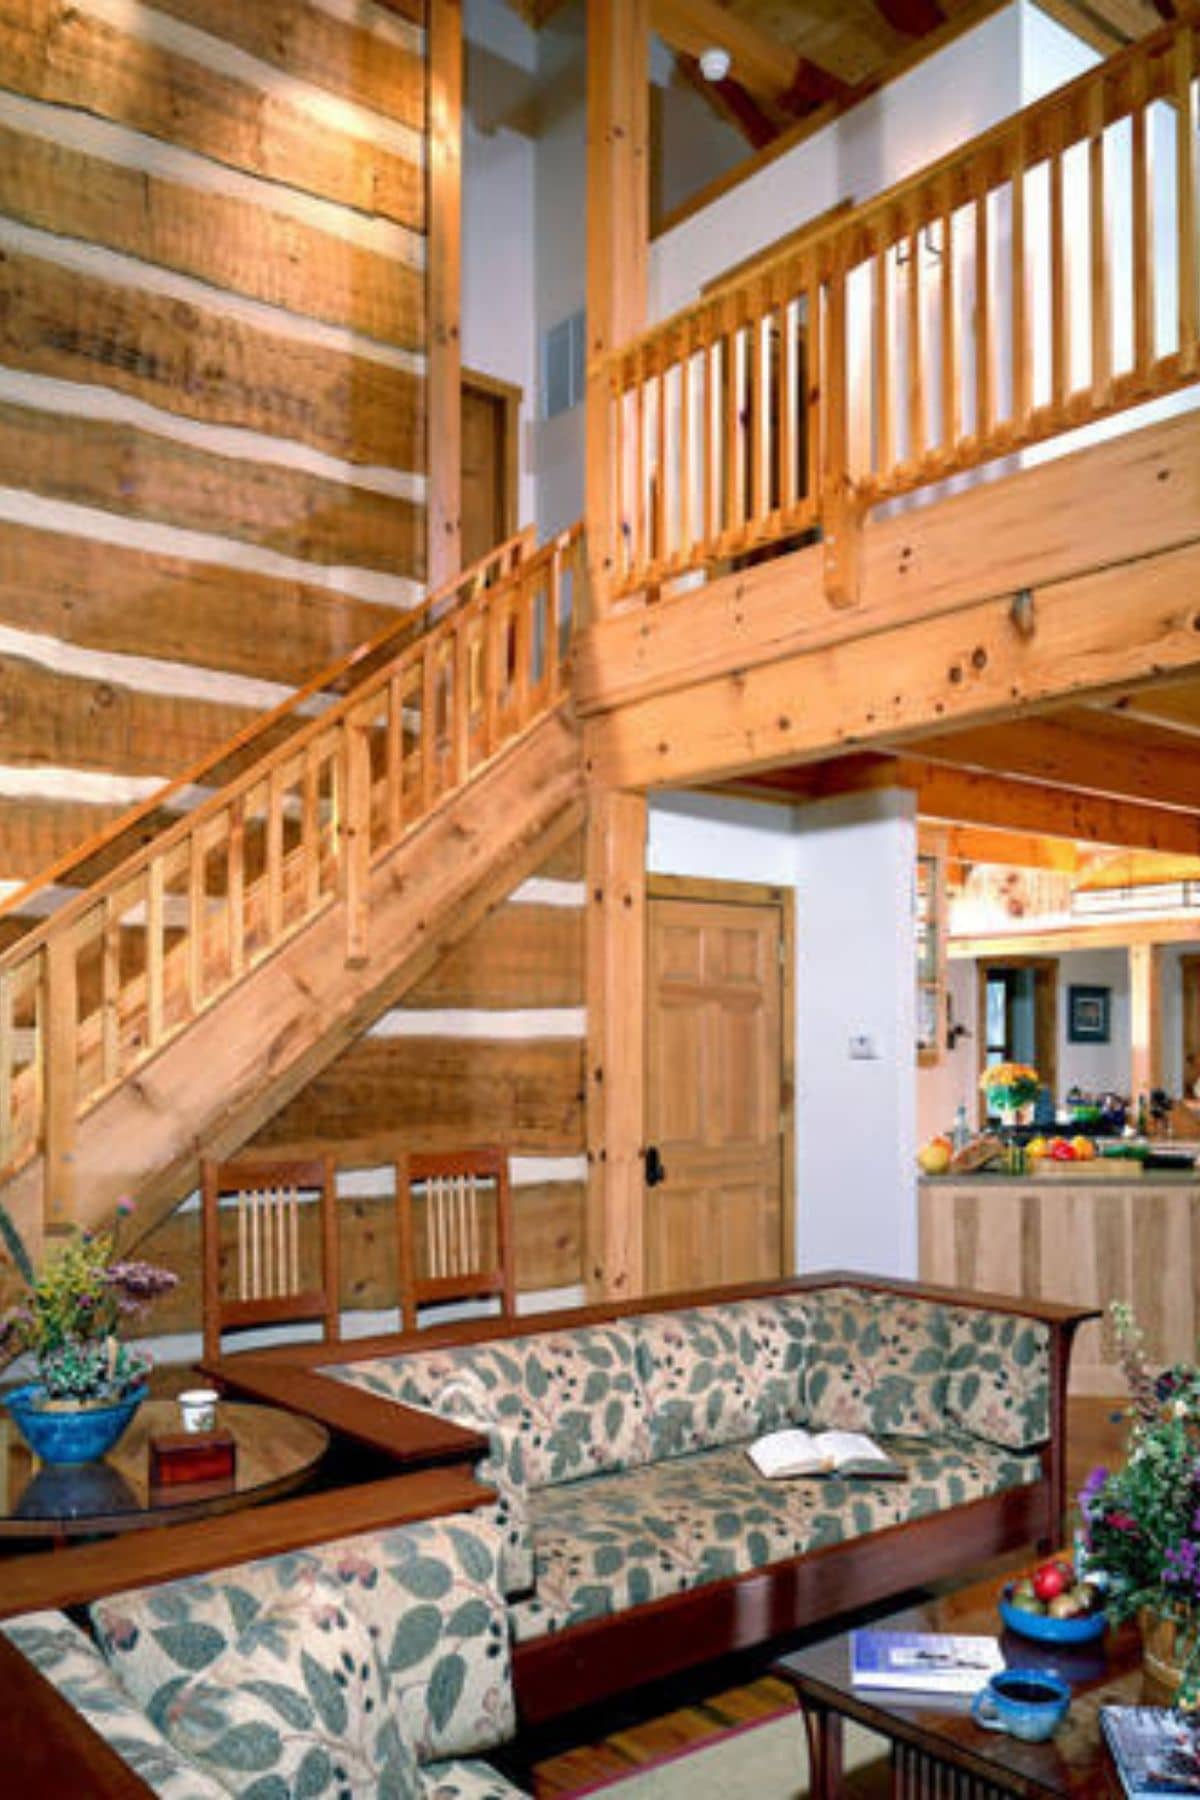 stairs to loft behind sofa against wood log cabin wall